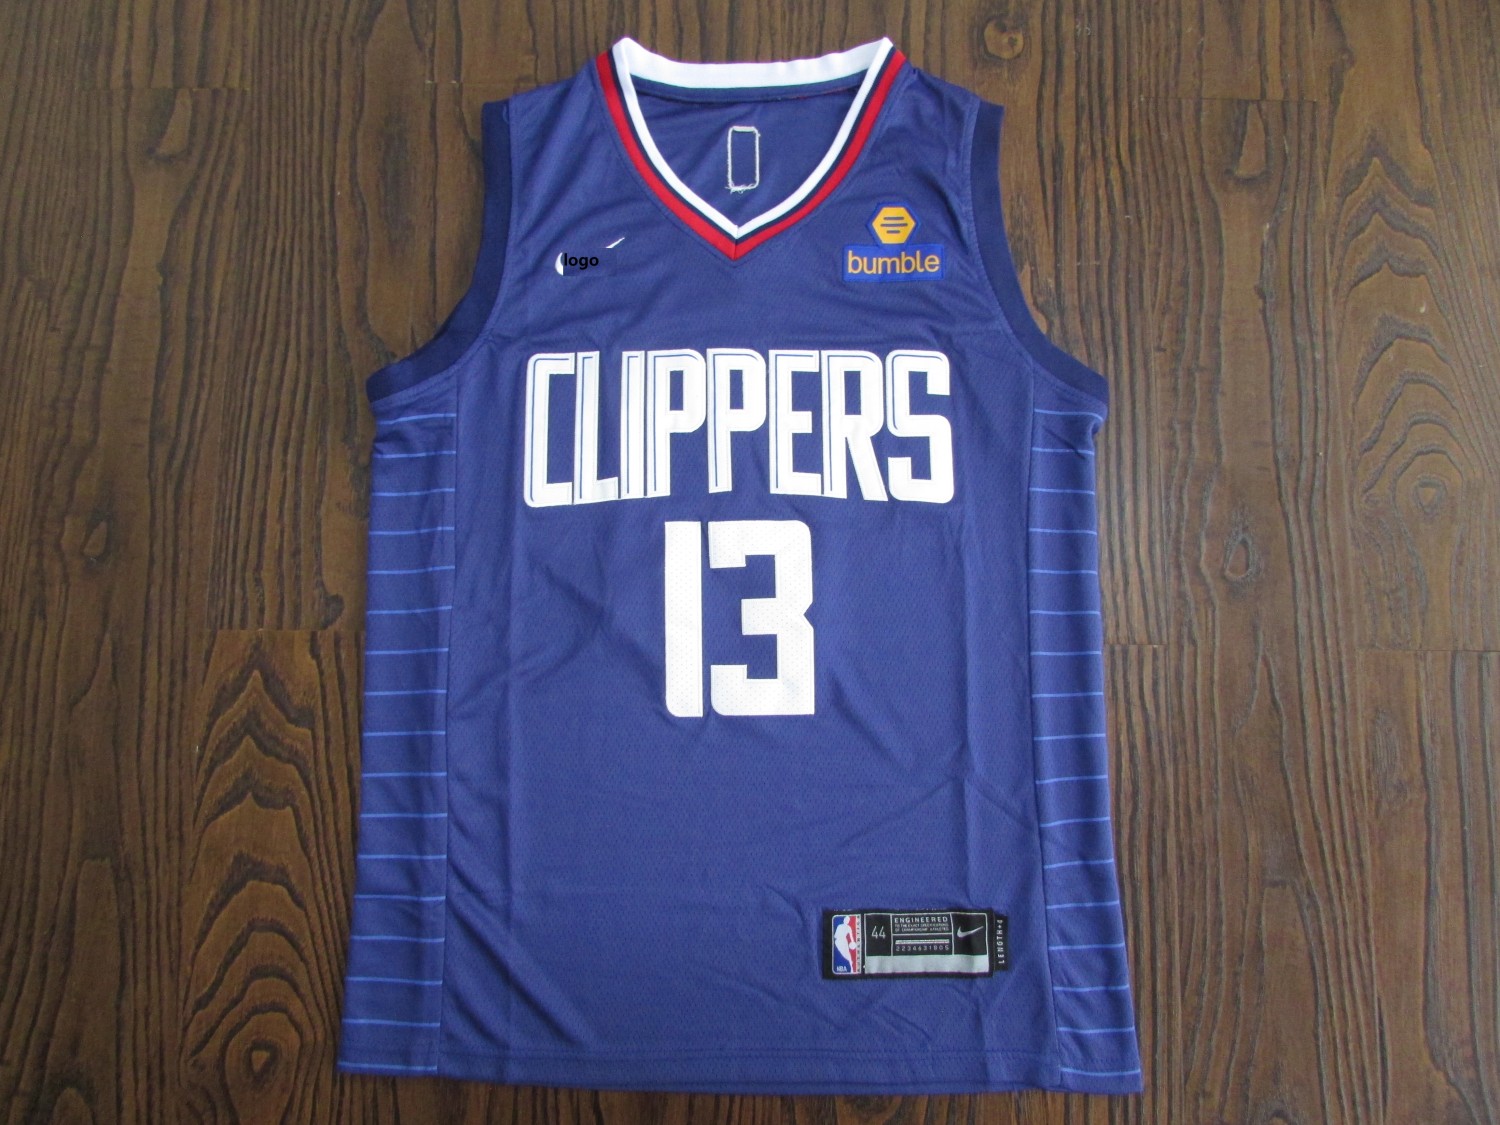 19-20 Adult Clippers basketball jersey shirt George 13 blue